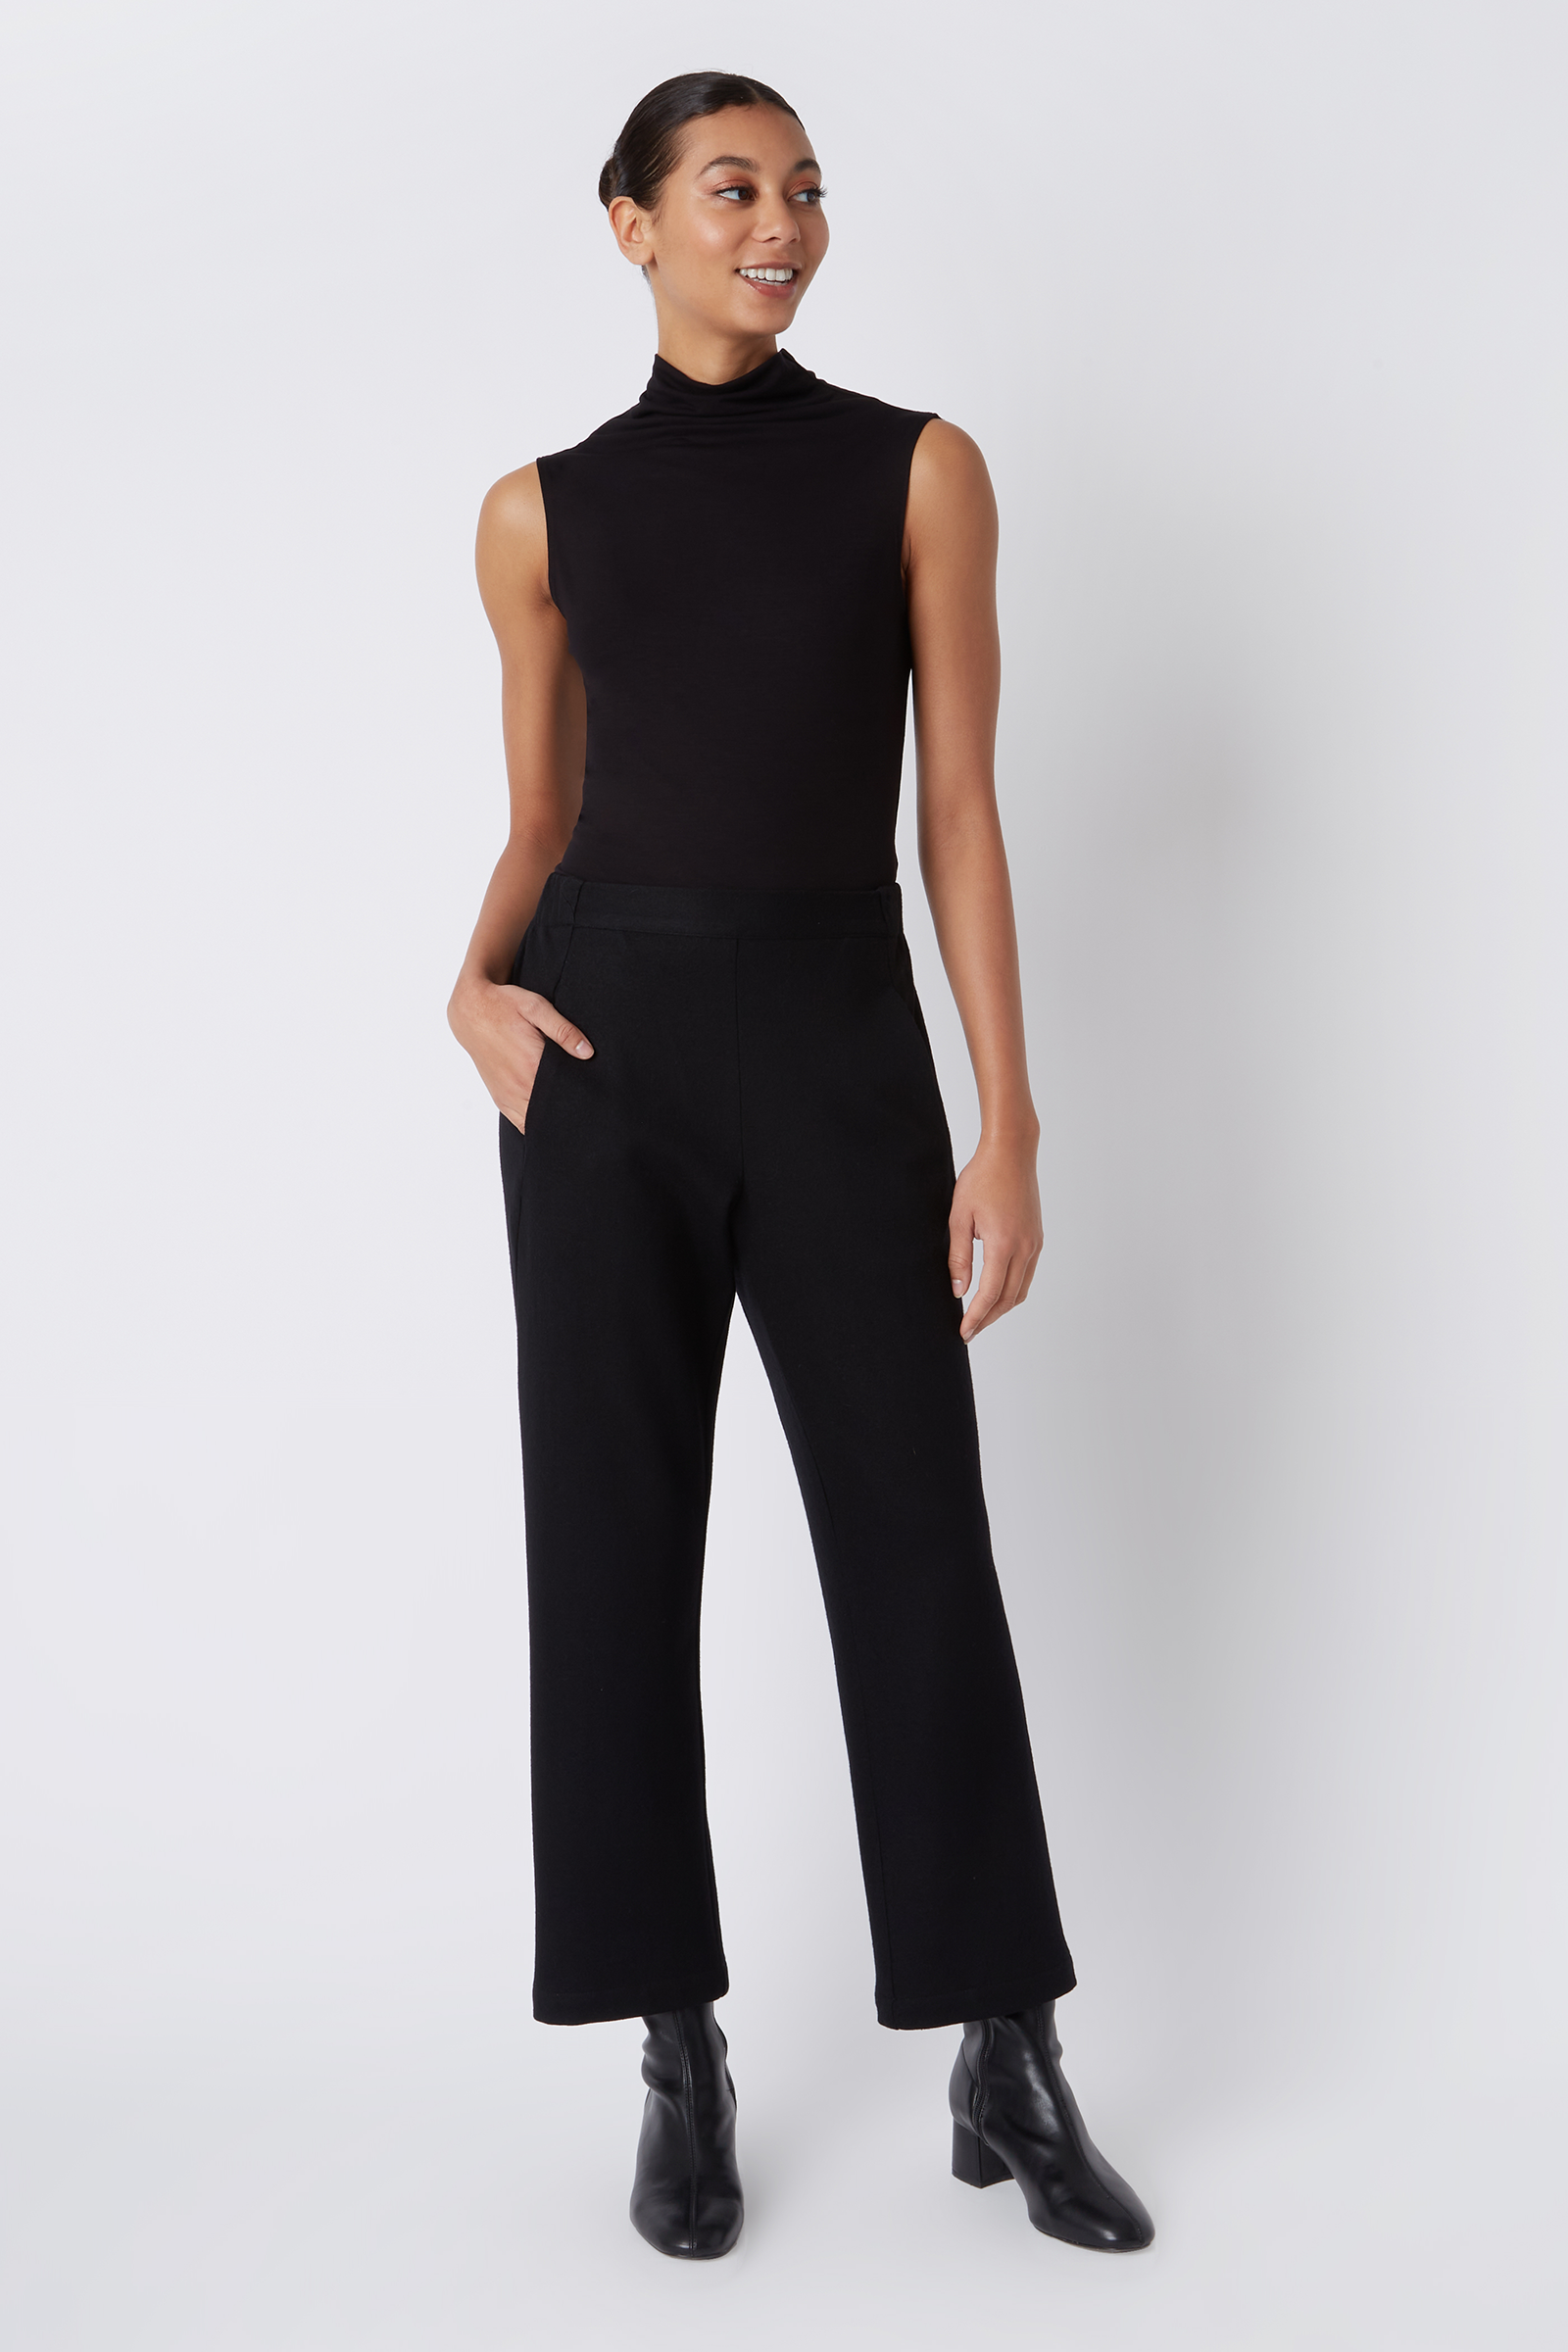 Kal Rieman Felted Jersey Angle Seam Crop Pant in Black Felted Jersey on Model Smiling Full Front View